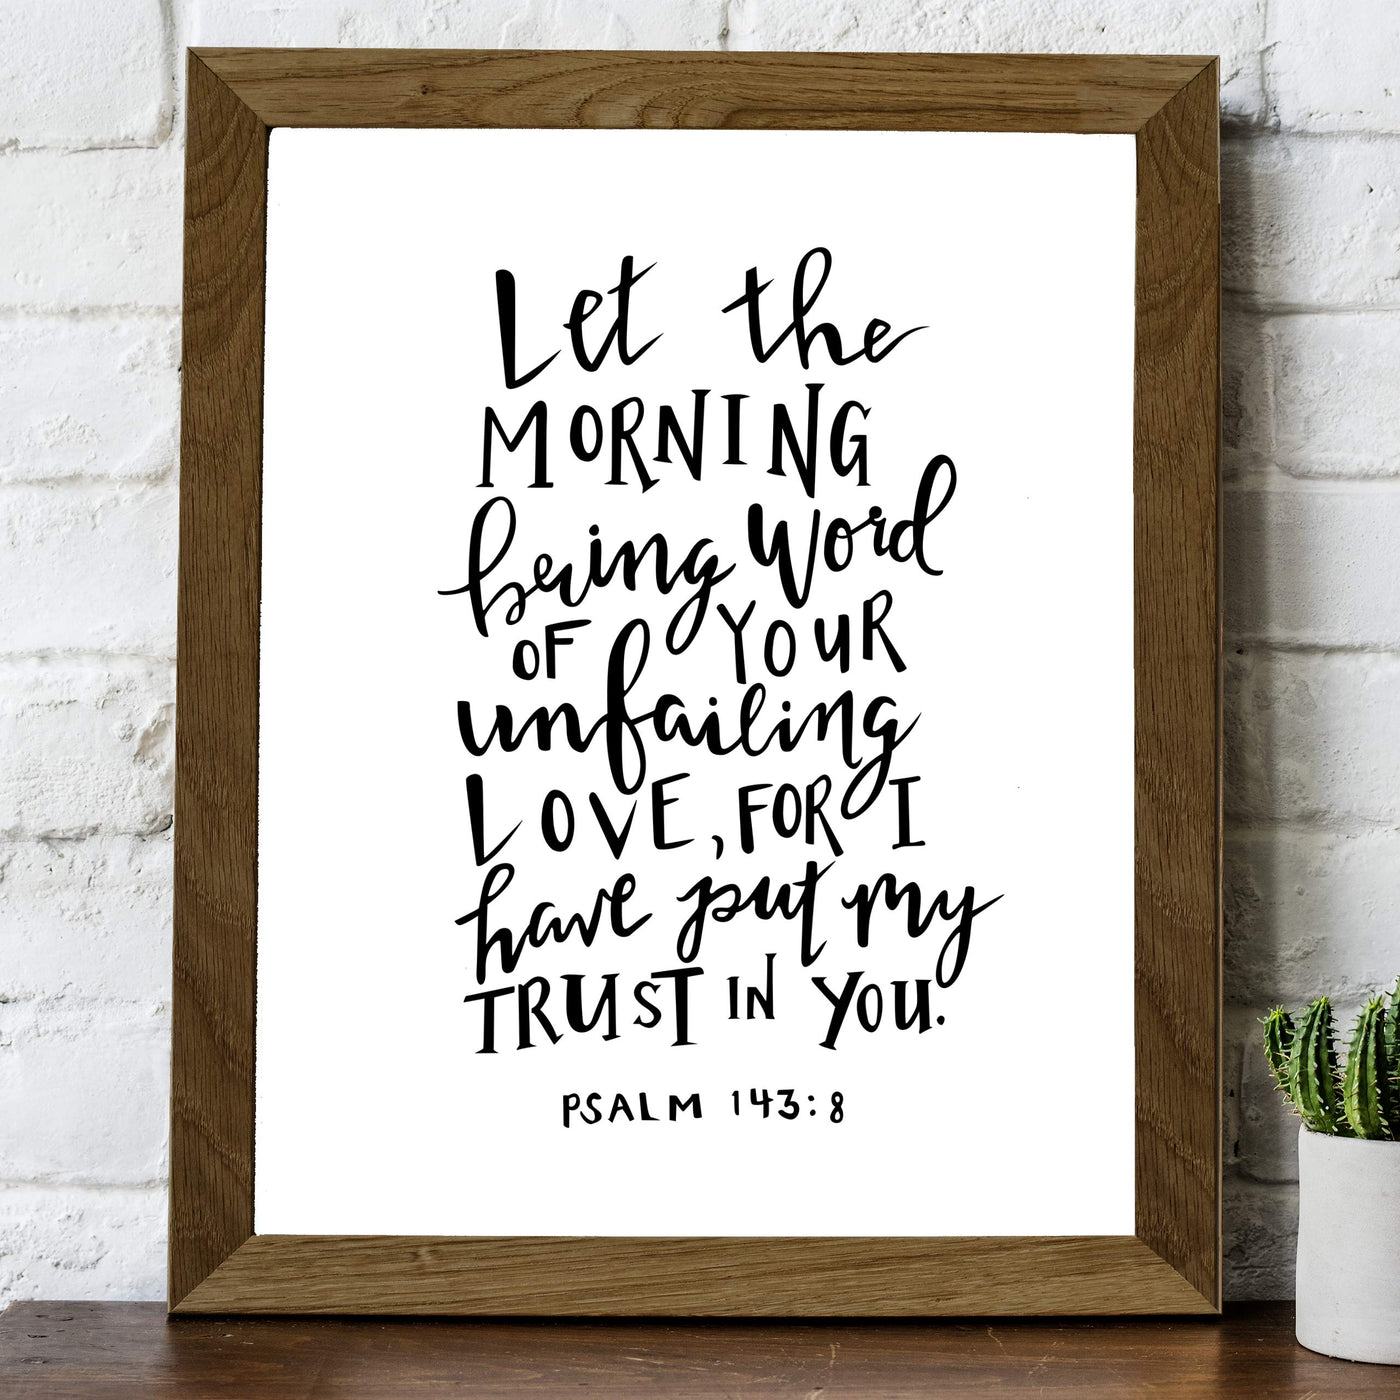 Psalm 143:8-"I Have Put My Trust In You"-Bible Verse Wall Art -8x10" Religious Scripture Print-Ready to Frame. Christian Decor for Home-Office-Church. Great Inspirational Gift! Have Faith in Him!